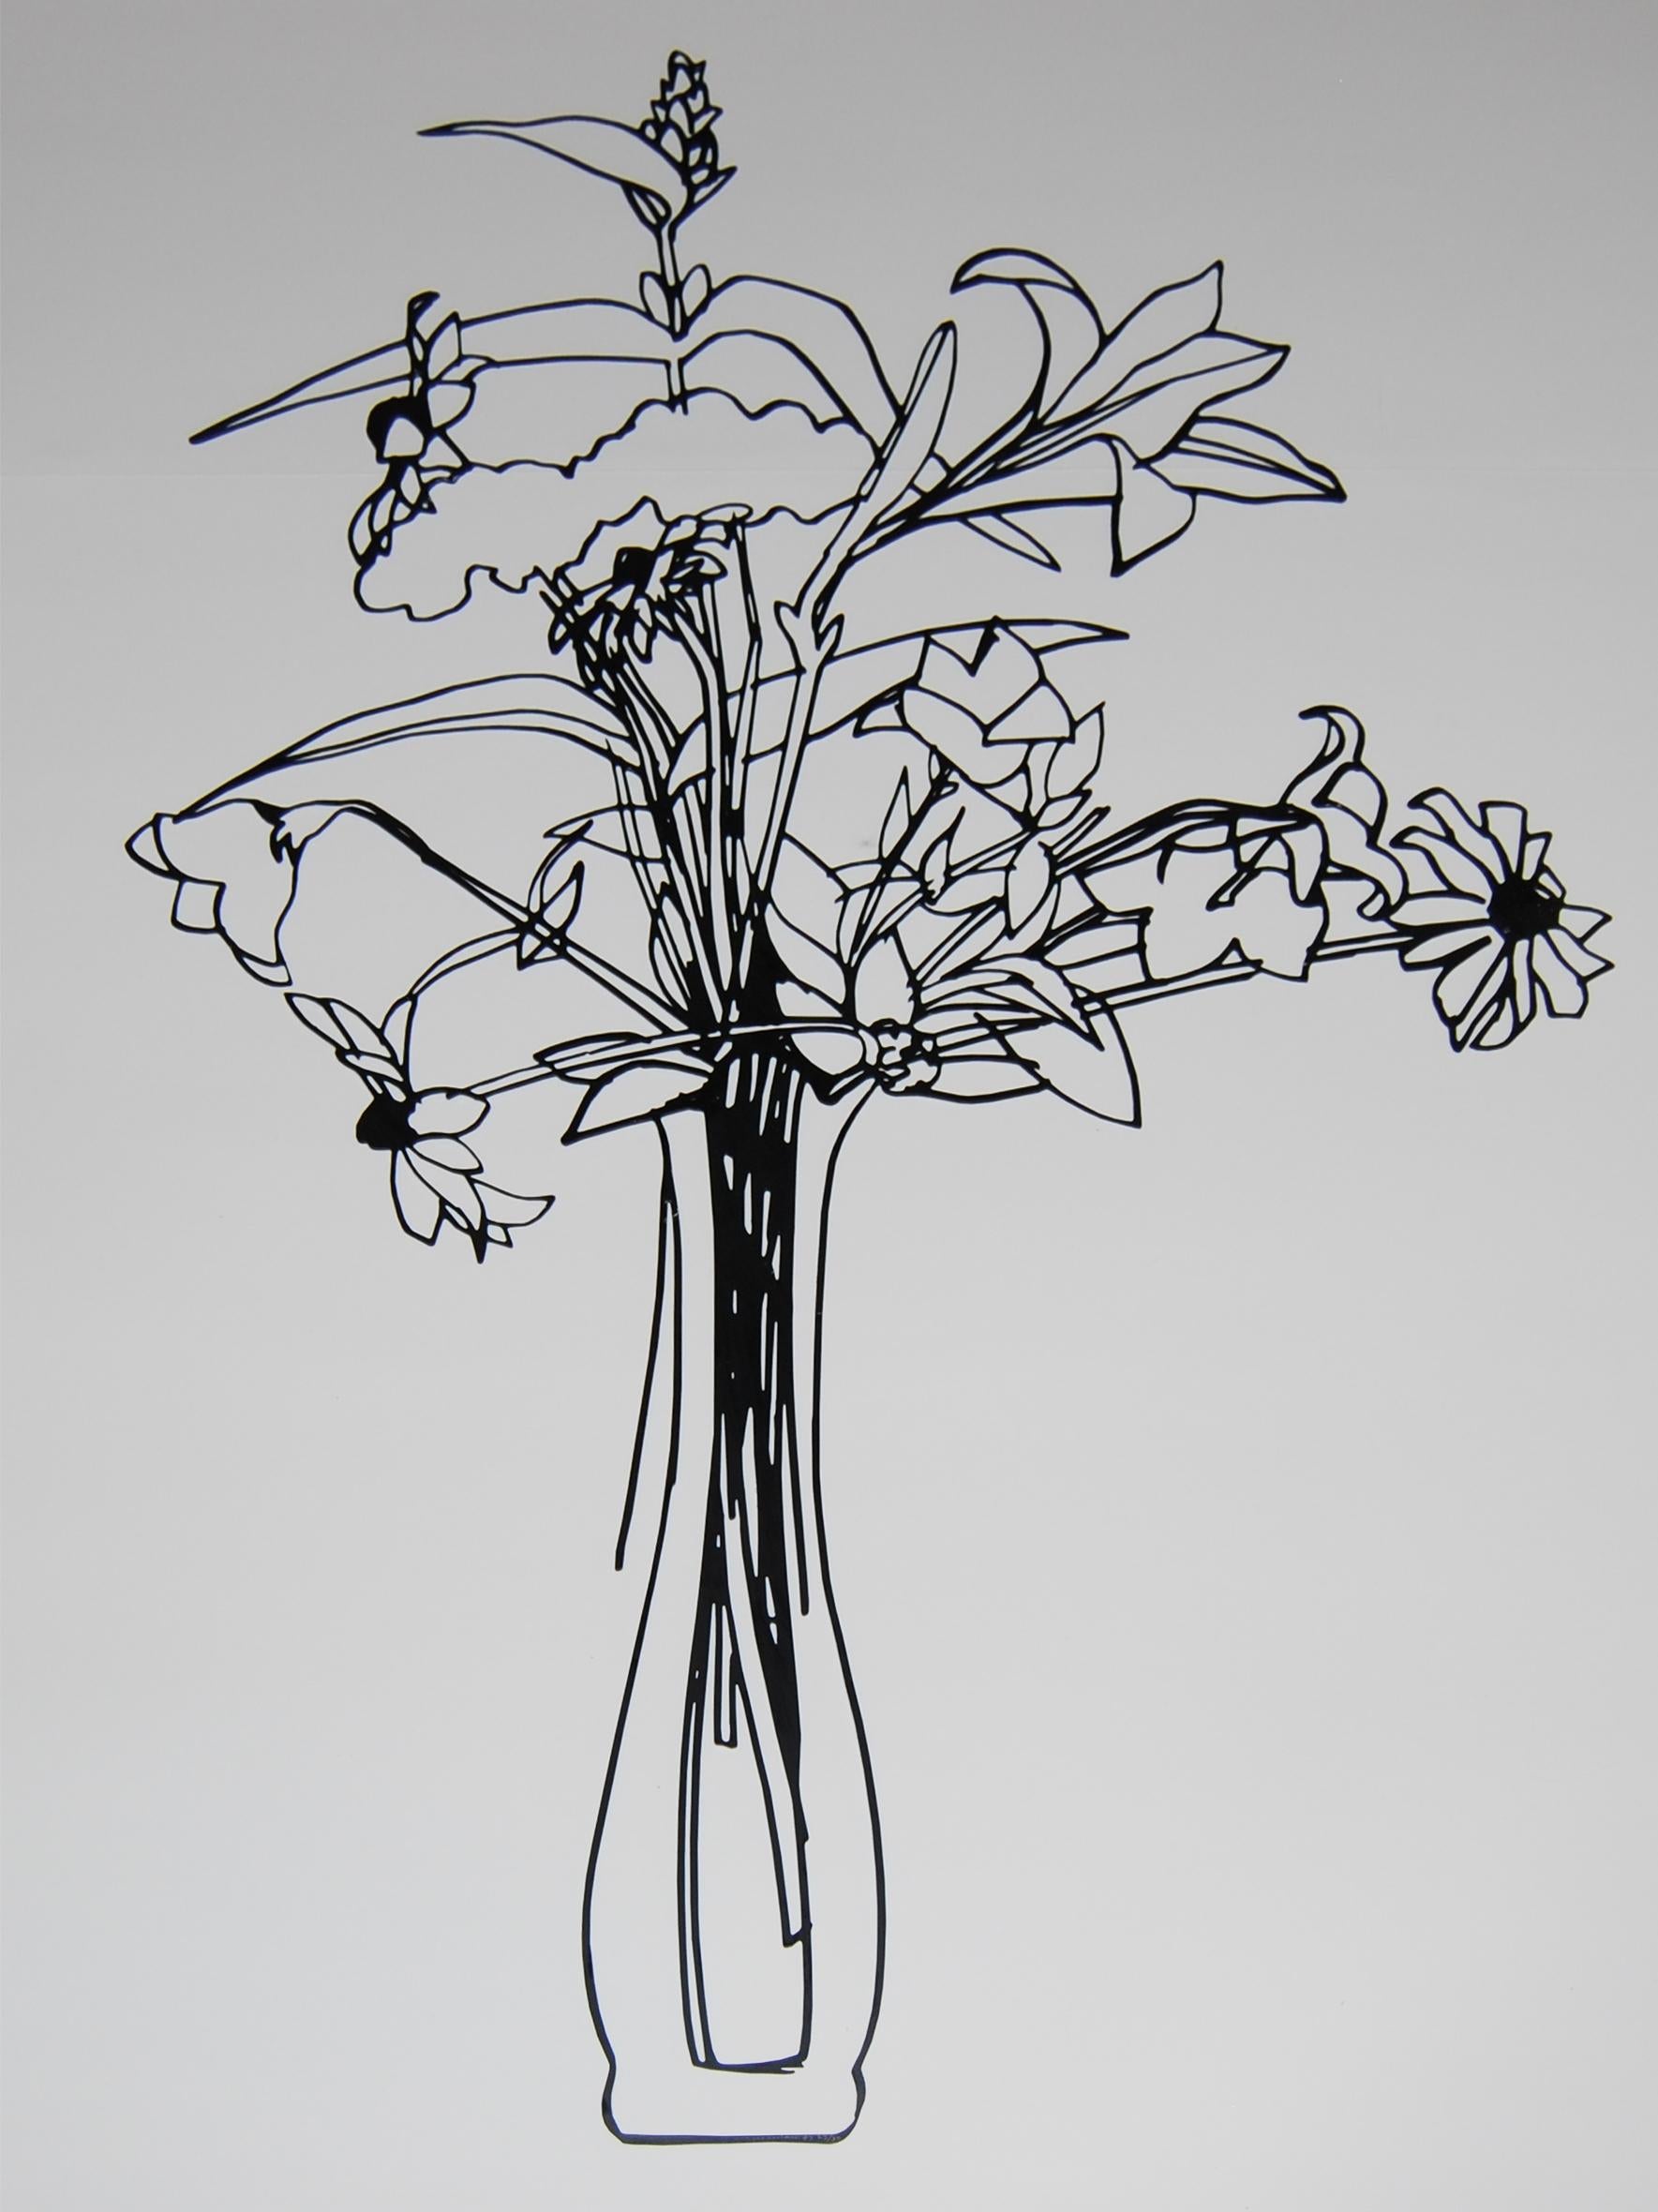 Tom Wesselmann Abstract Print - "Wildflower Bouquet" Laser Cut and Enamel Stainless Steel Drawing